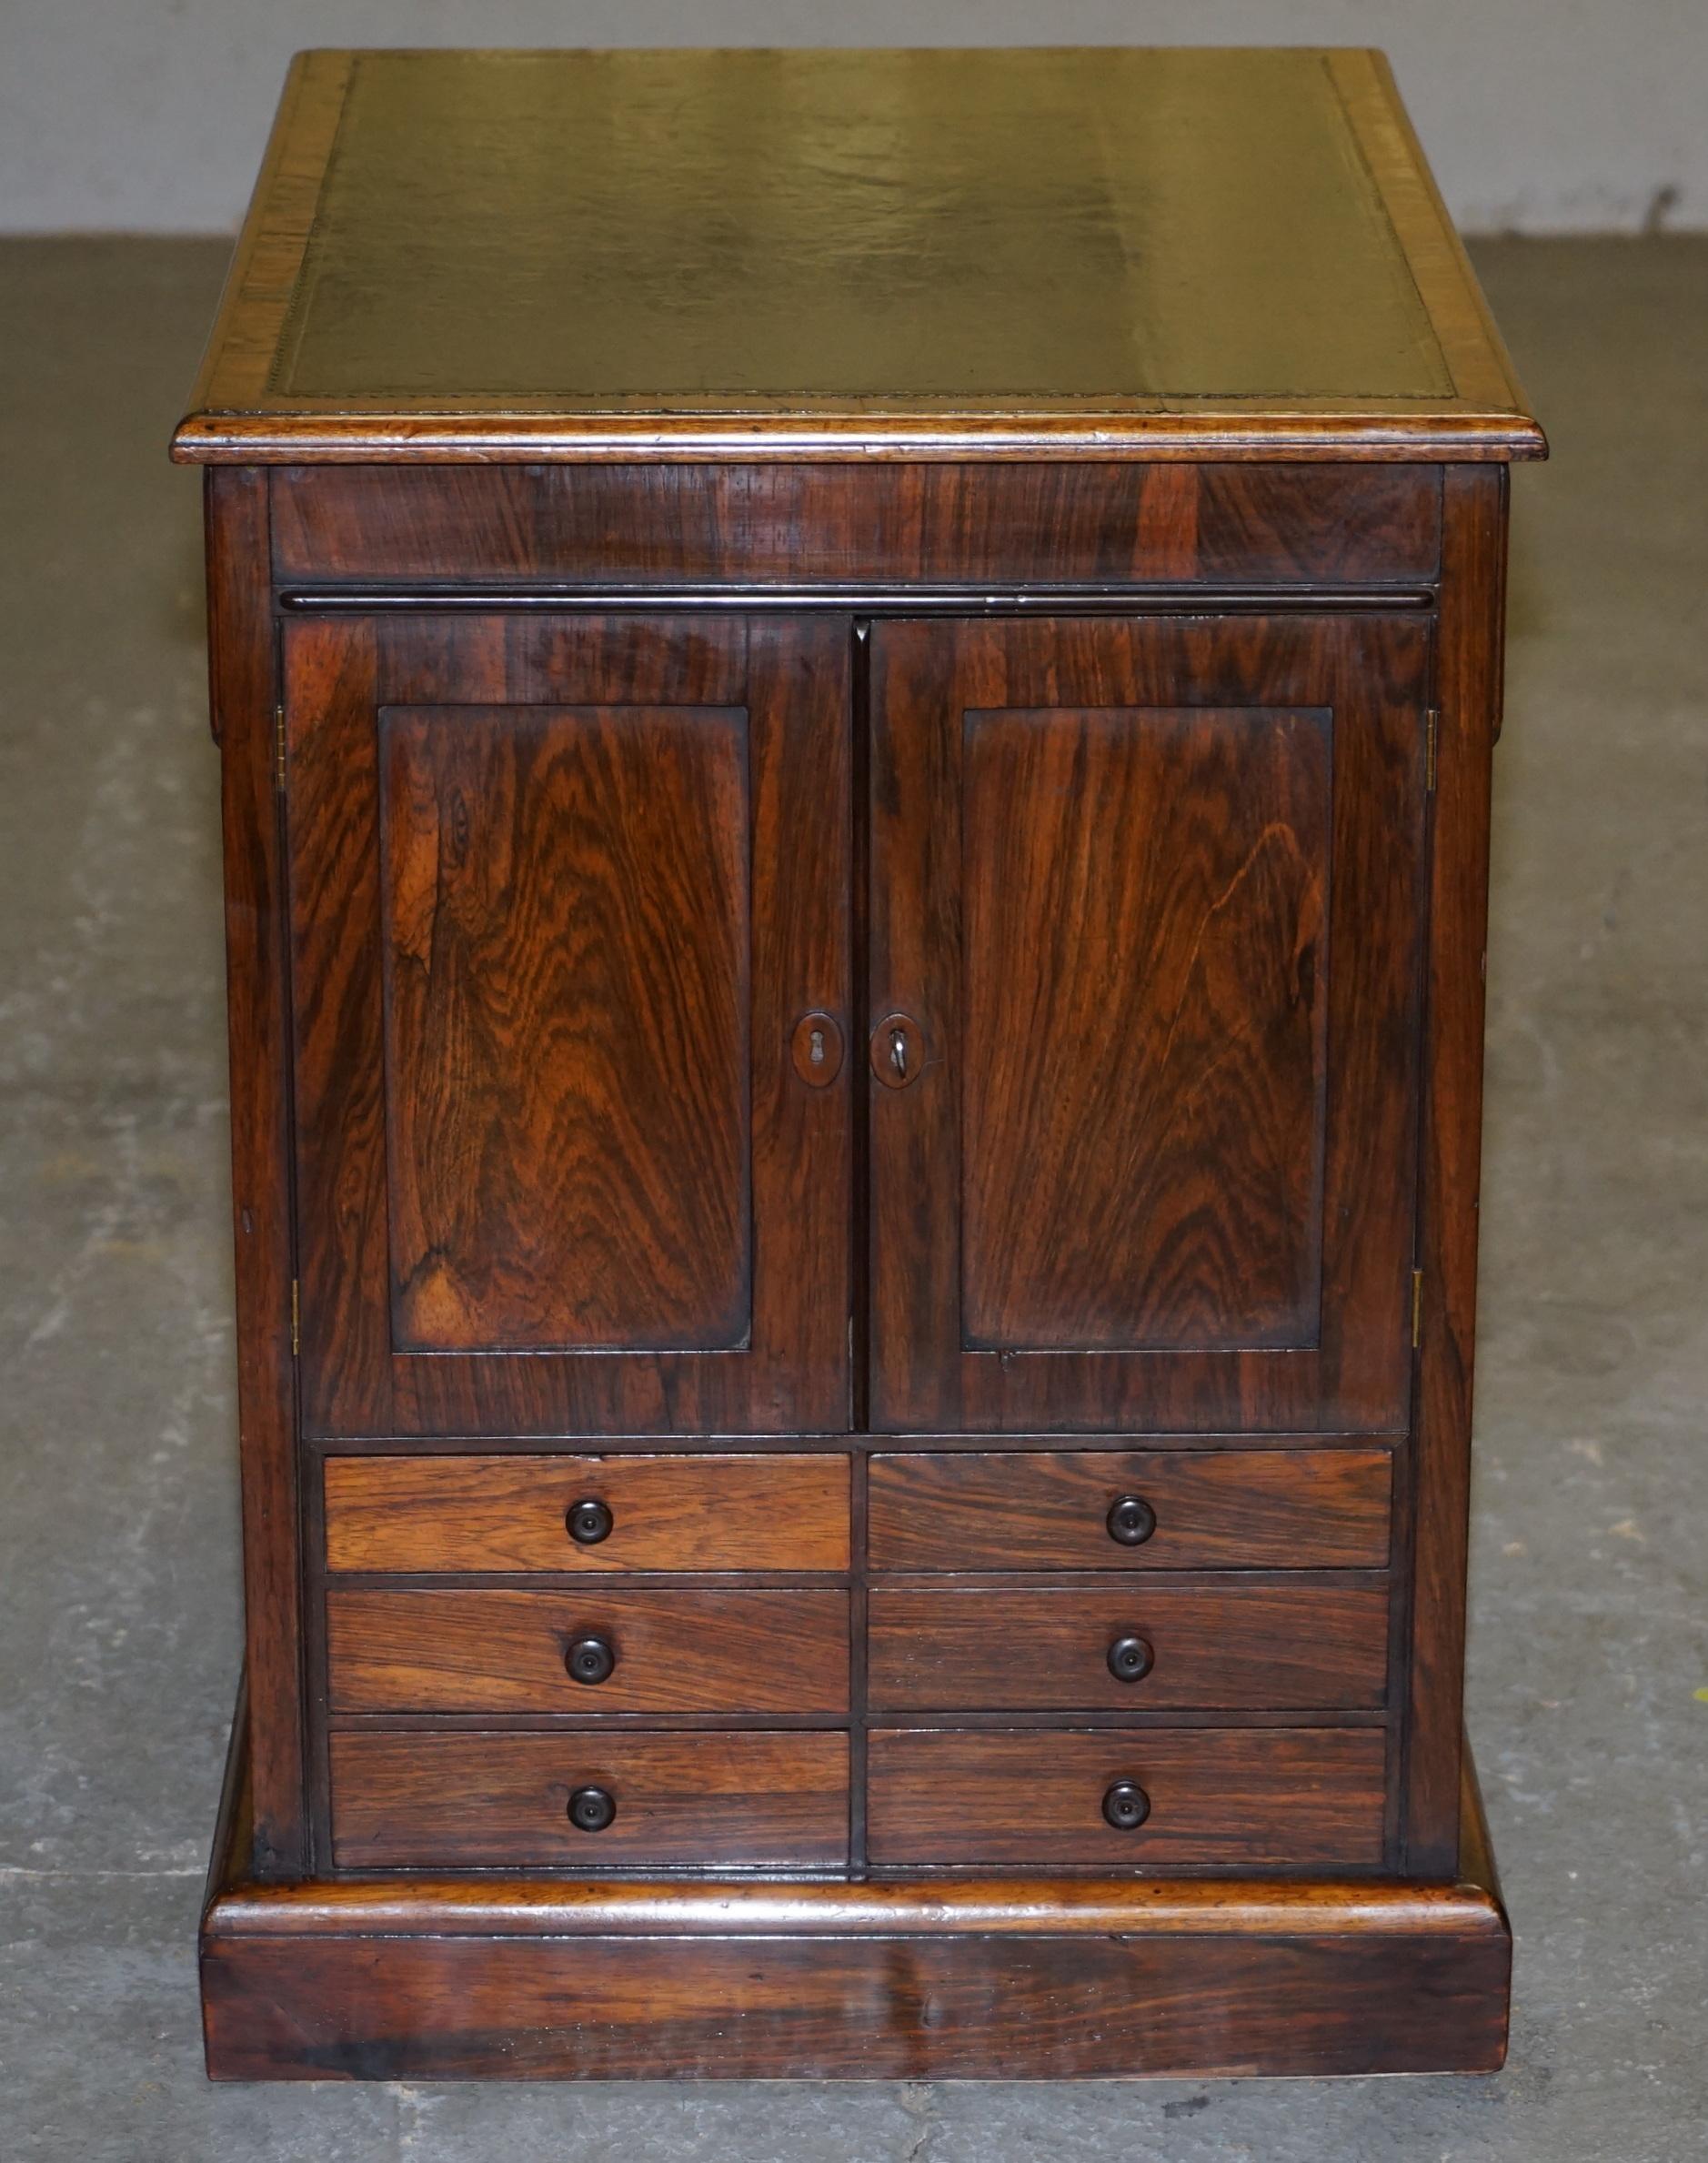 RARE WILLIAM IV CIRCA 1830 HARDWOOD LIBRARY FOLIO CABiNET WITH DRAWERS BOOKCASE For Sale 1